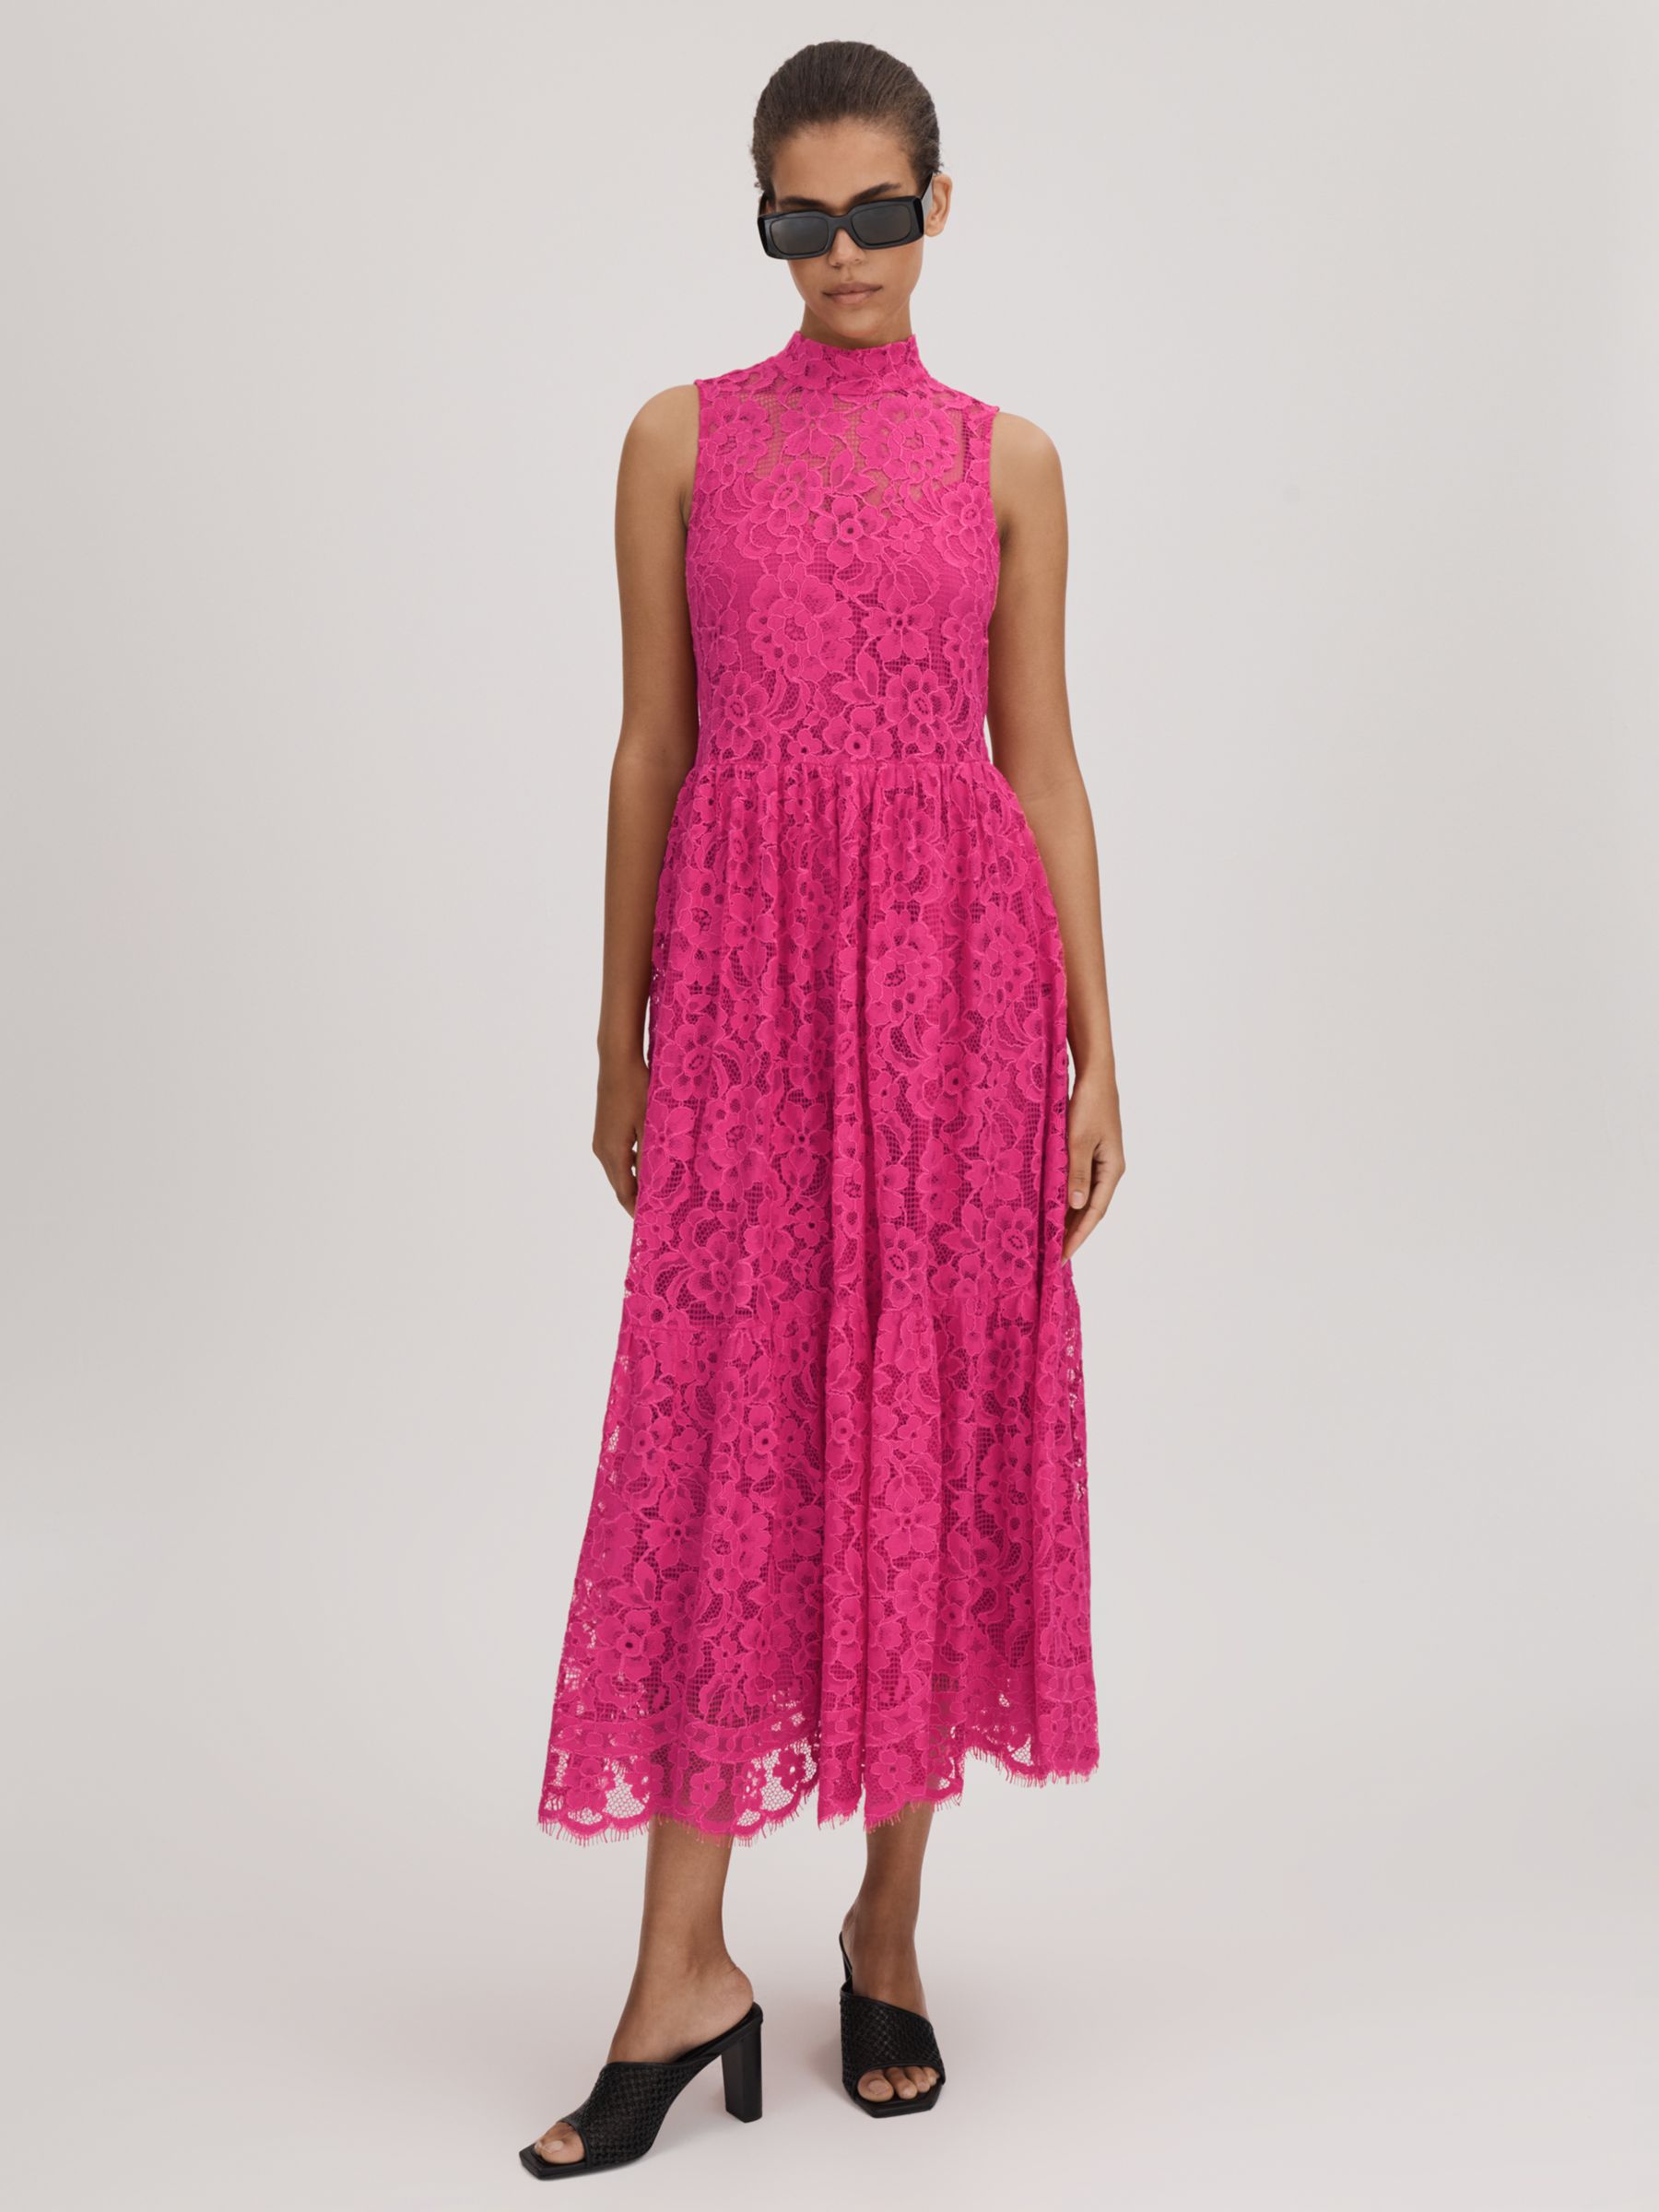 FLORERE High Neck Floral Lace Midi Dress, Bright Pink, 8